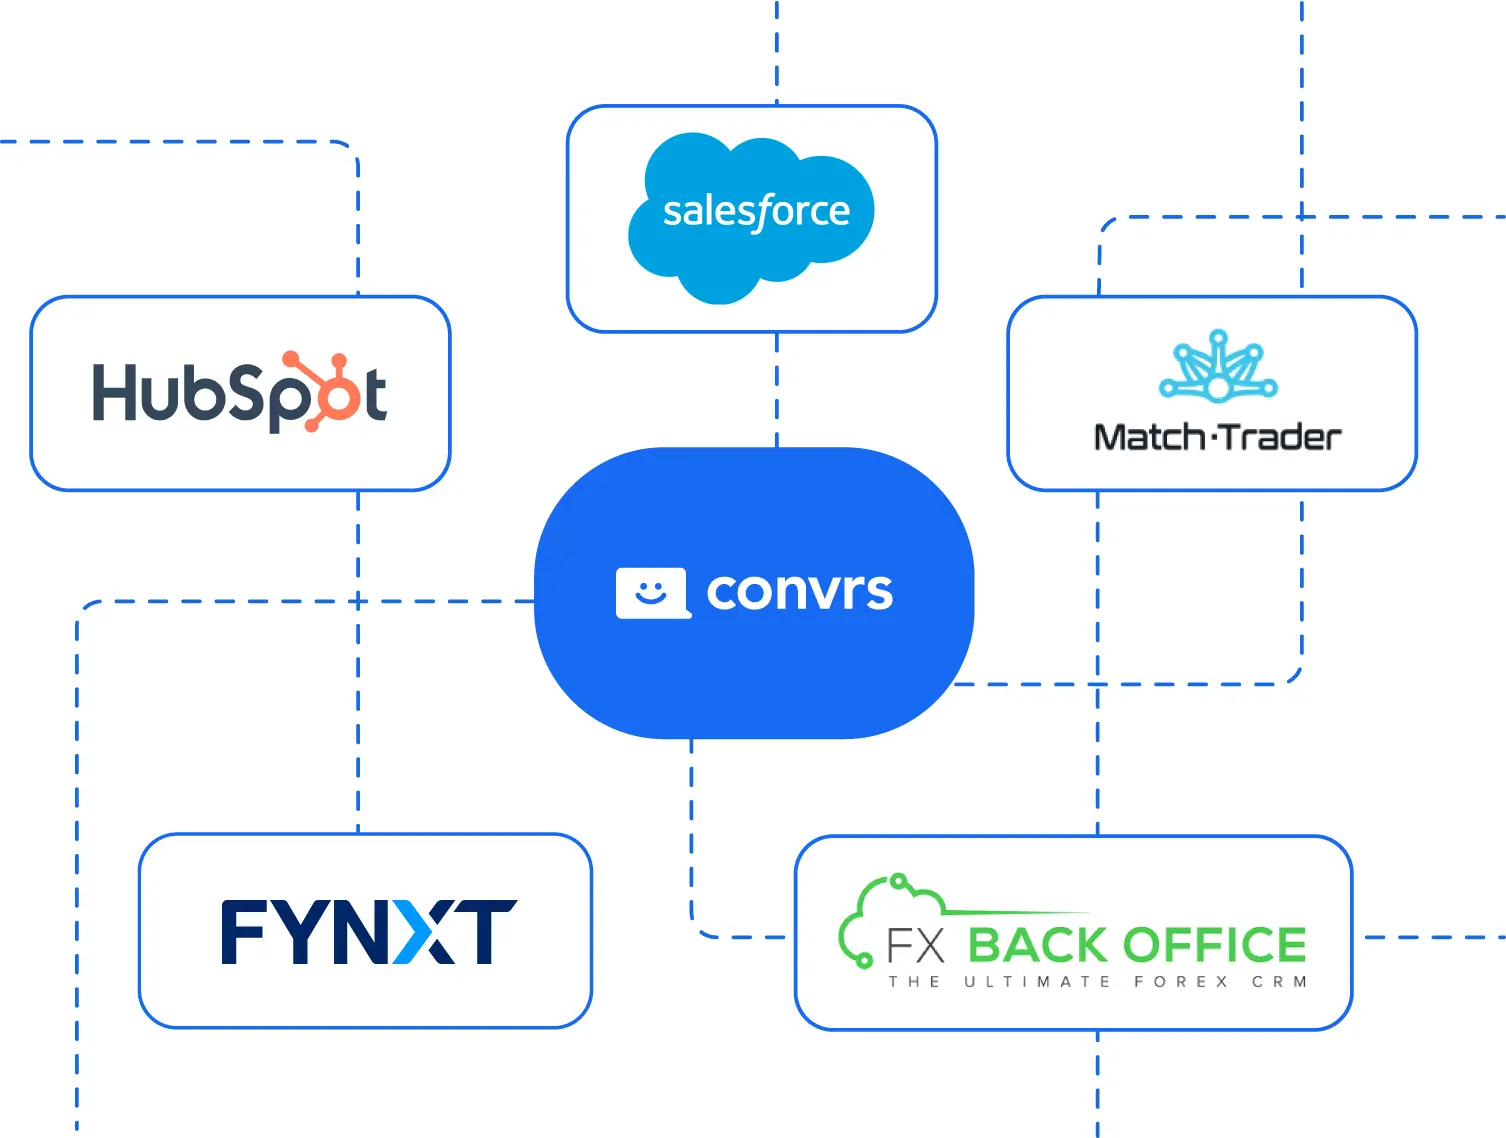 Integrate Convrs with Salesforce, HubSpot, Match Trader, FX Back Office, and FYNXT.